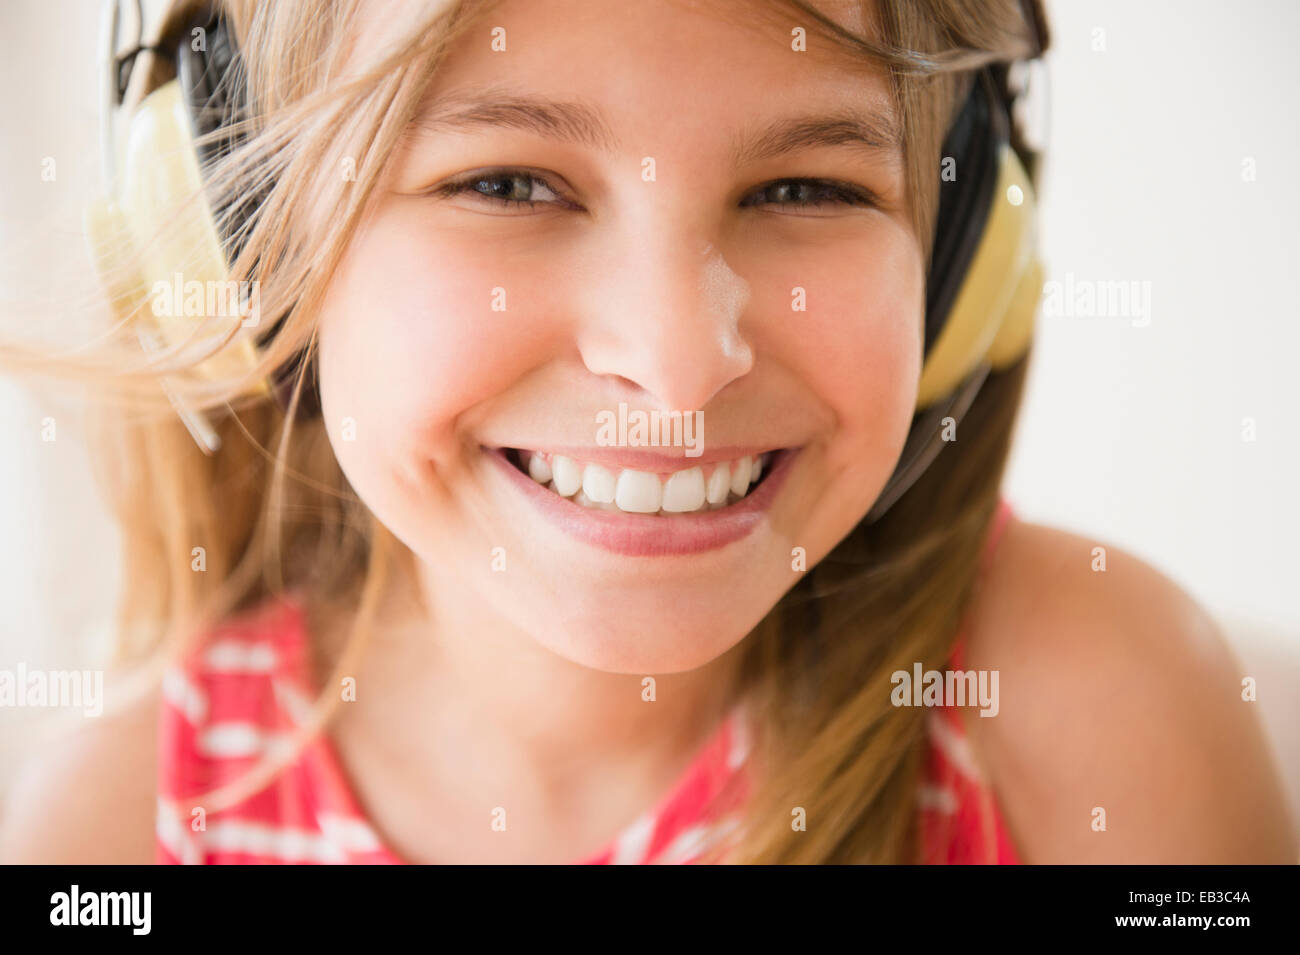 Close up of Caucasian girl wearing headphones Banque D'Images